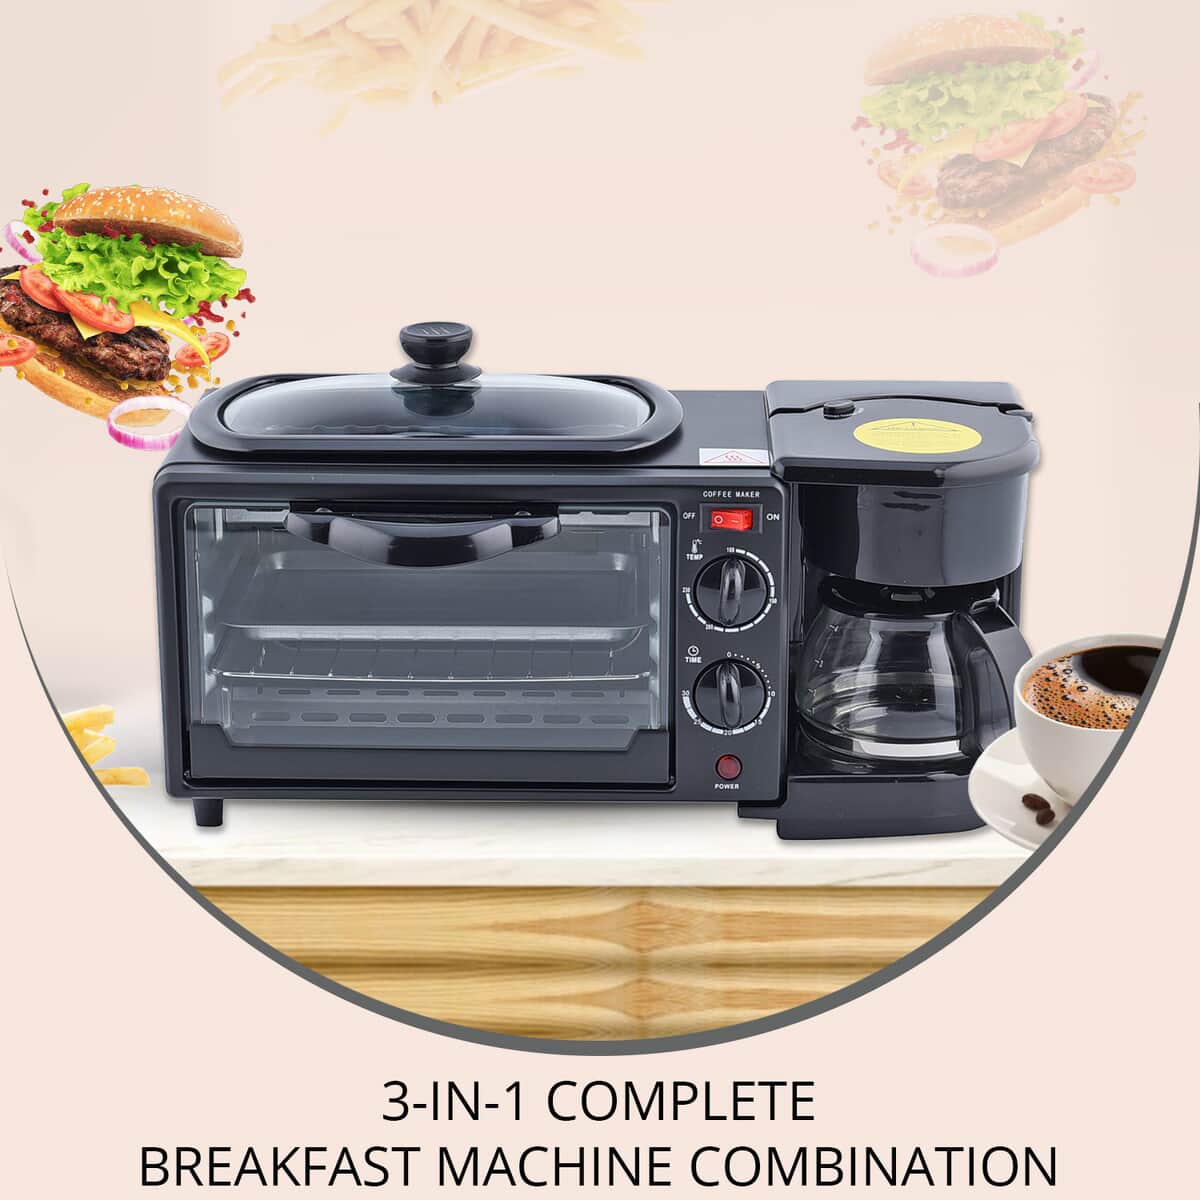 3-in-1 Complete Breakfast Machine Combination - Oven, Frying Pan and Coffee Maker (9 Liters) image number 1